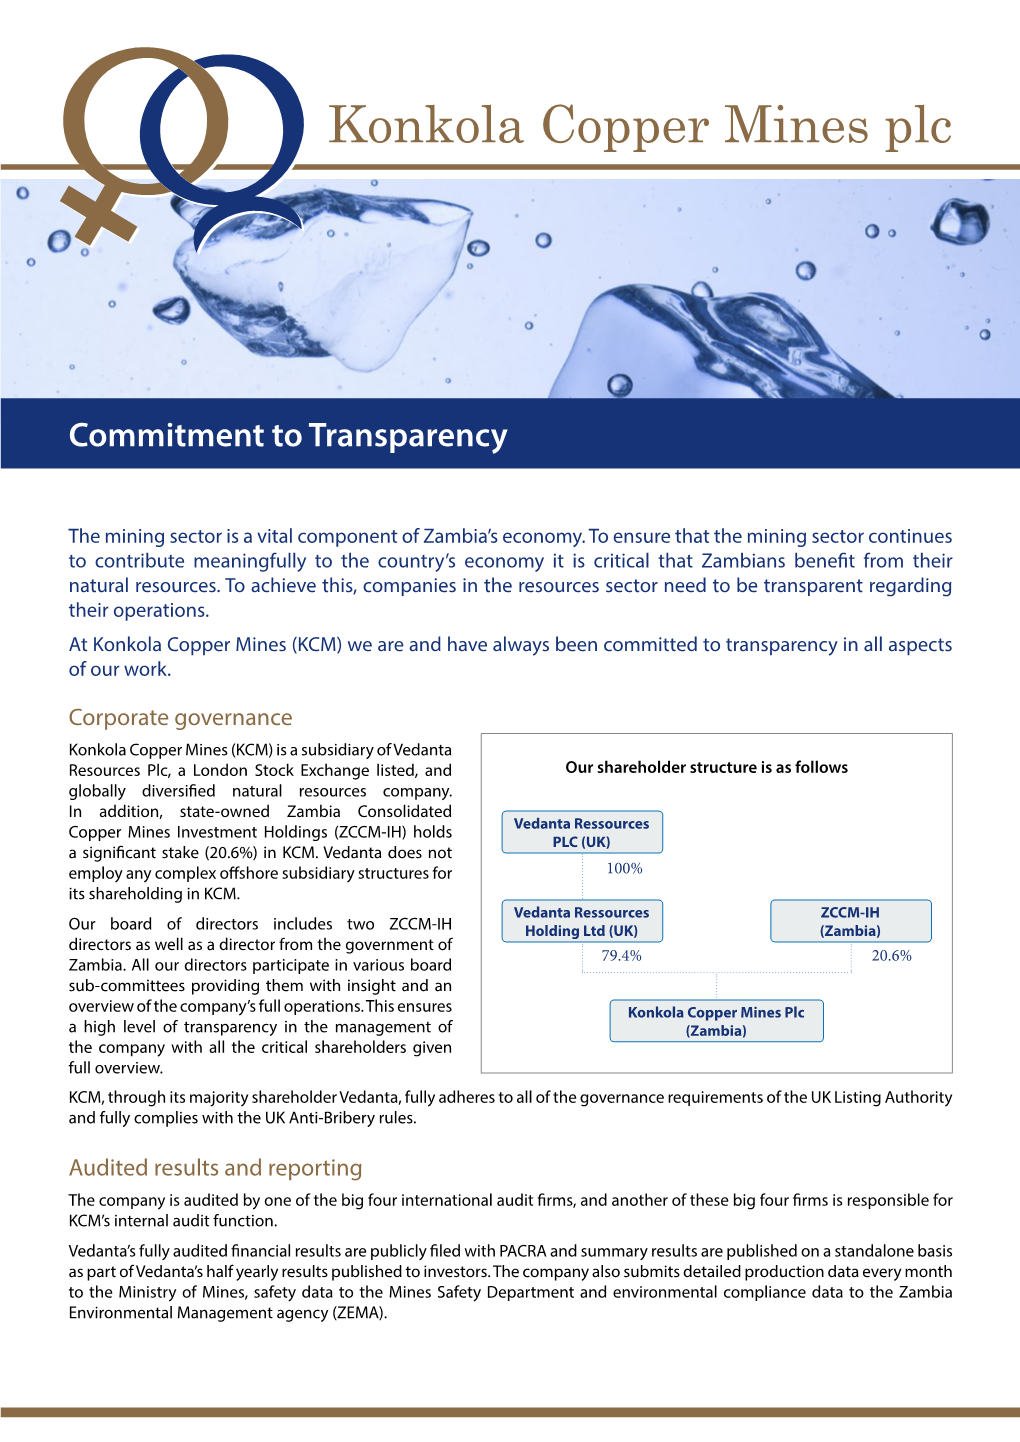 Commitment to Transparency